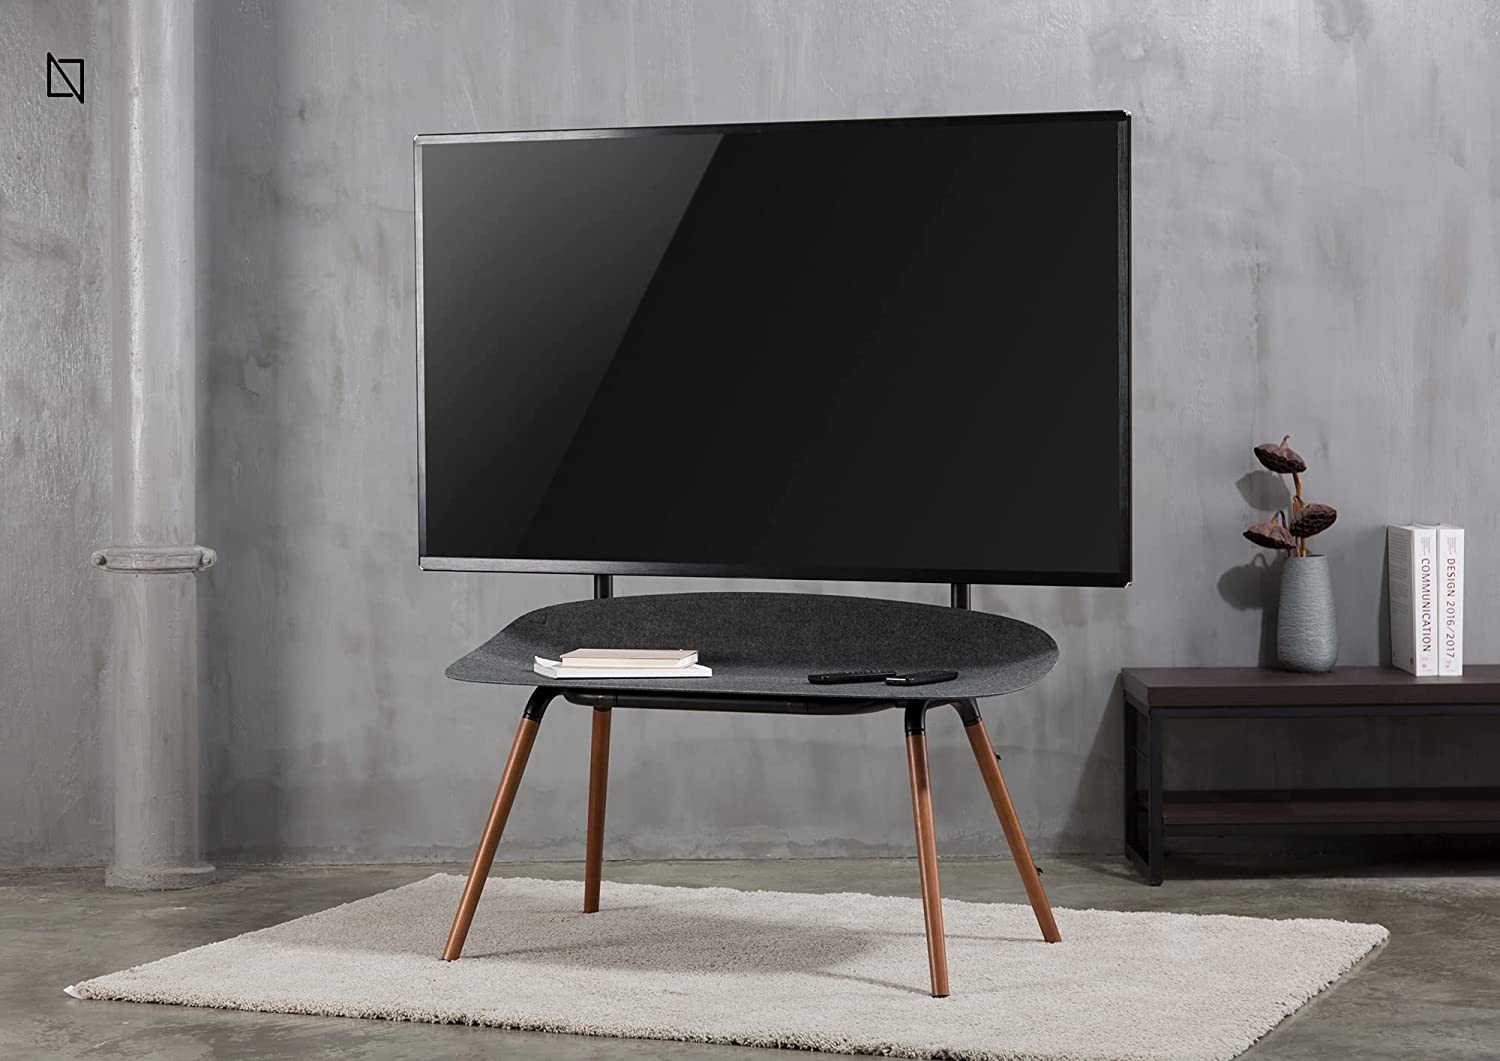 Nordic Wooden TV Floor Stand Modern & Minimalistic TV Stand By Navodesk